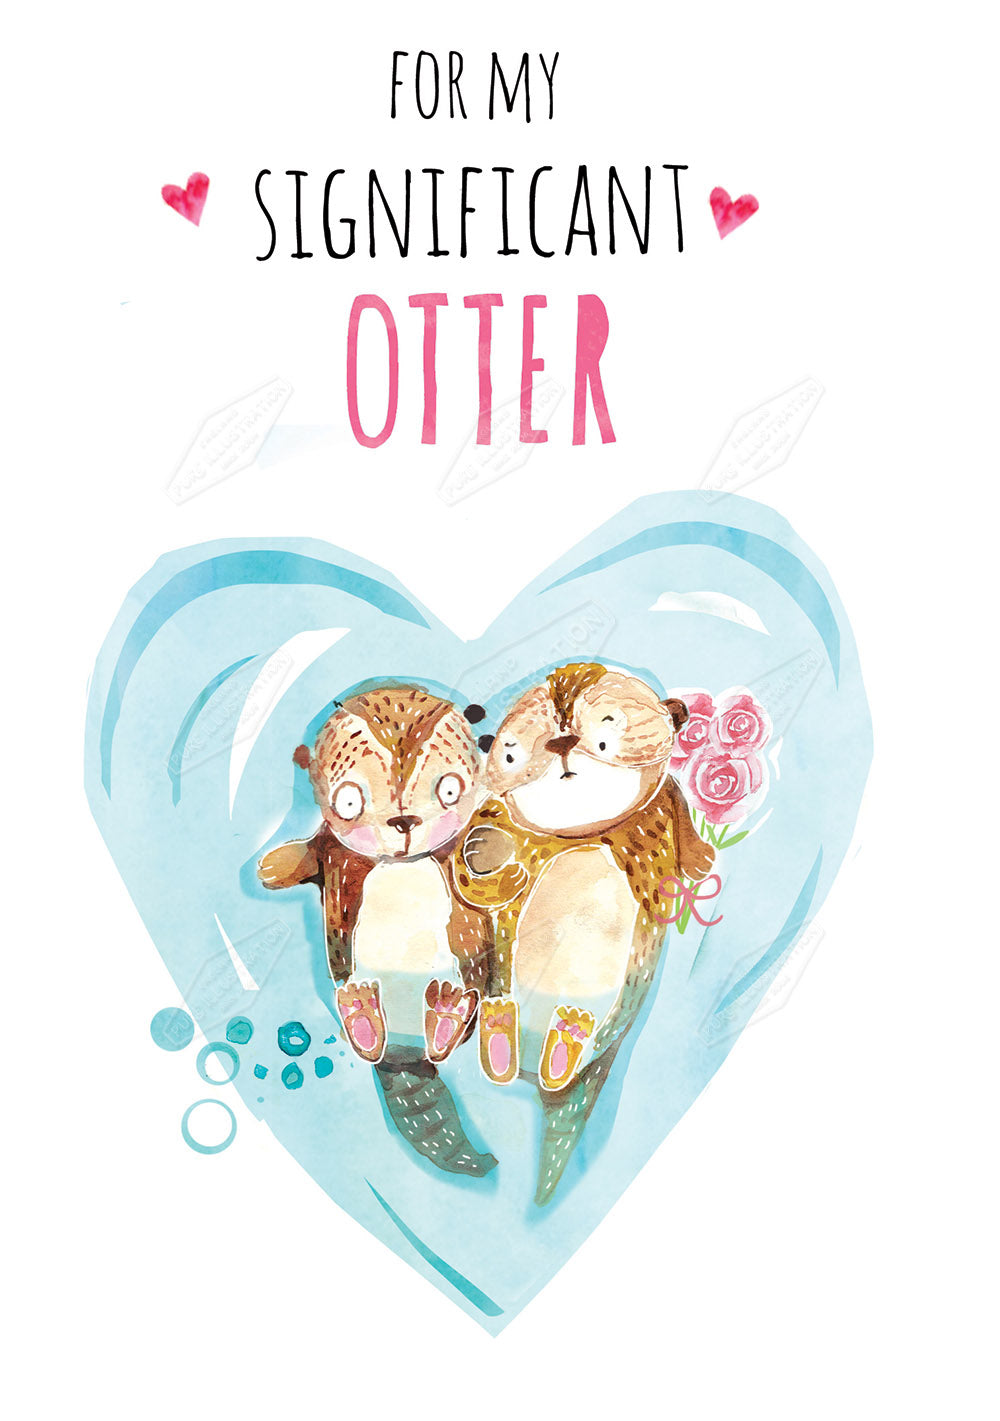 00028559EST- Emily Stalley is represented by Pure Art Licensing Agency - Valentine's Greeting Card Design